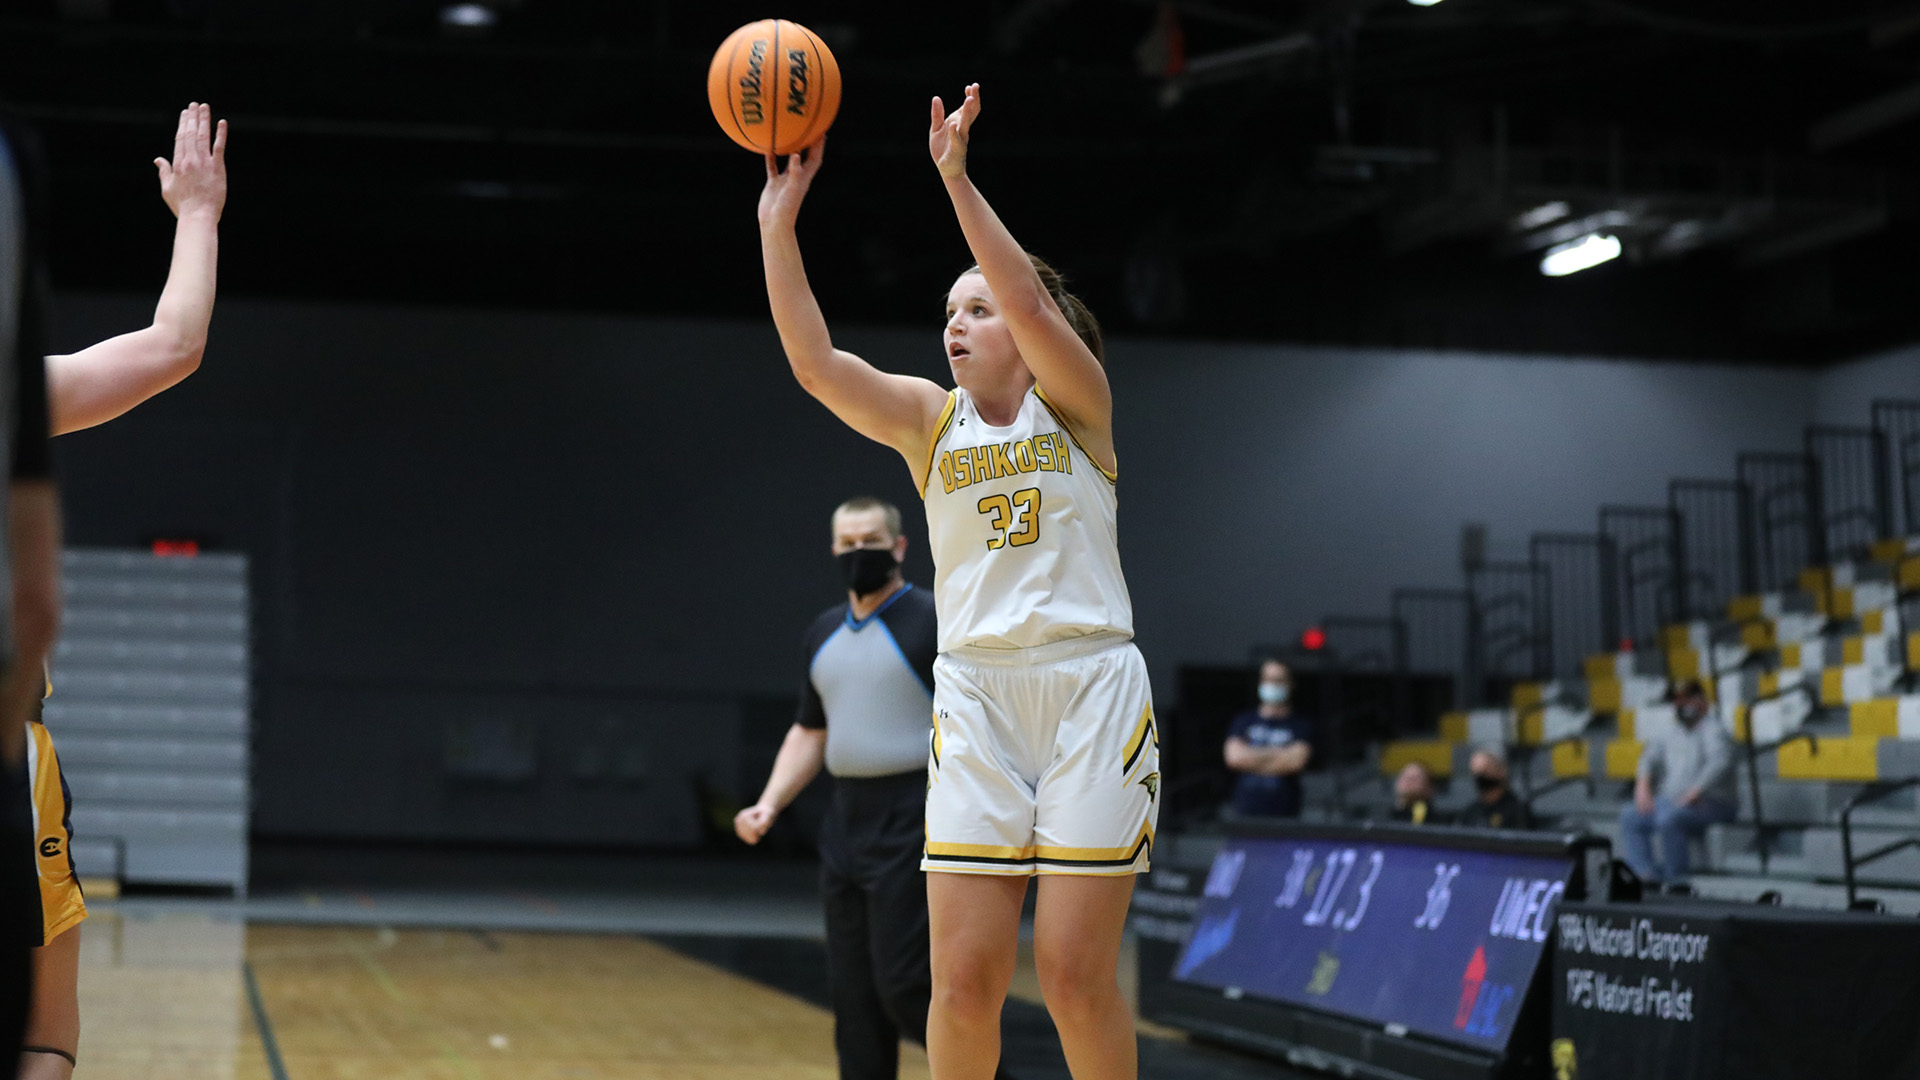 Nikkio Arneson scored 22 points against the Blugolds for her third game this season with at least 22 points.